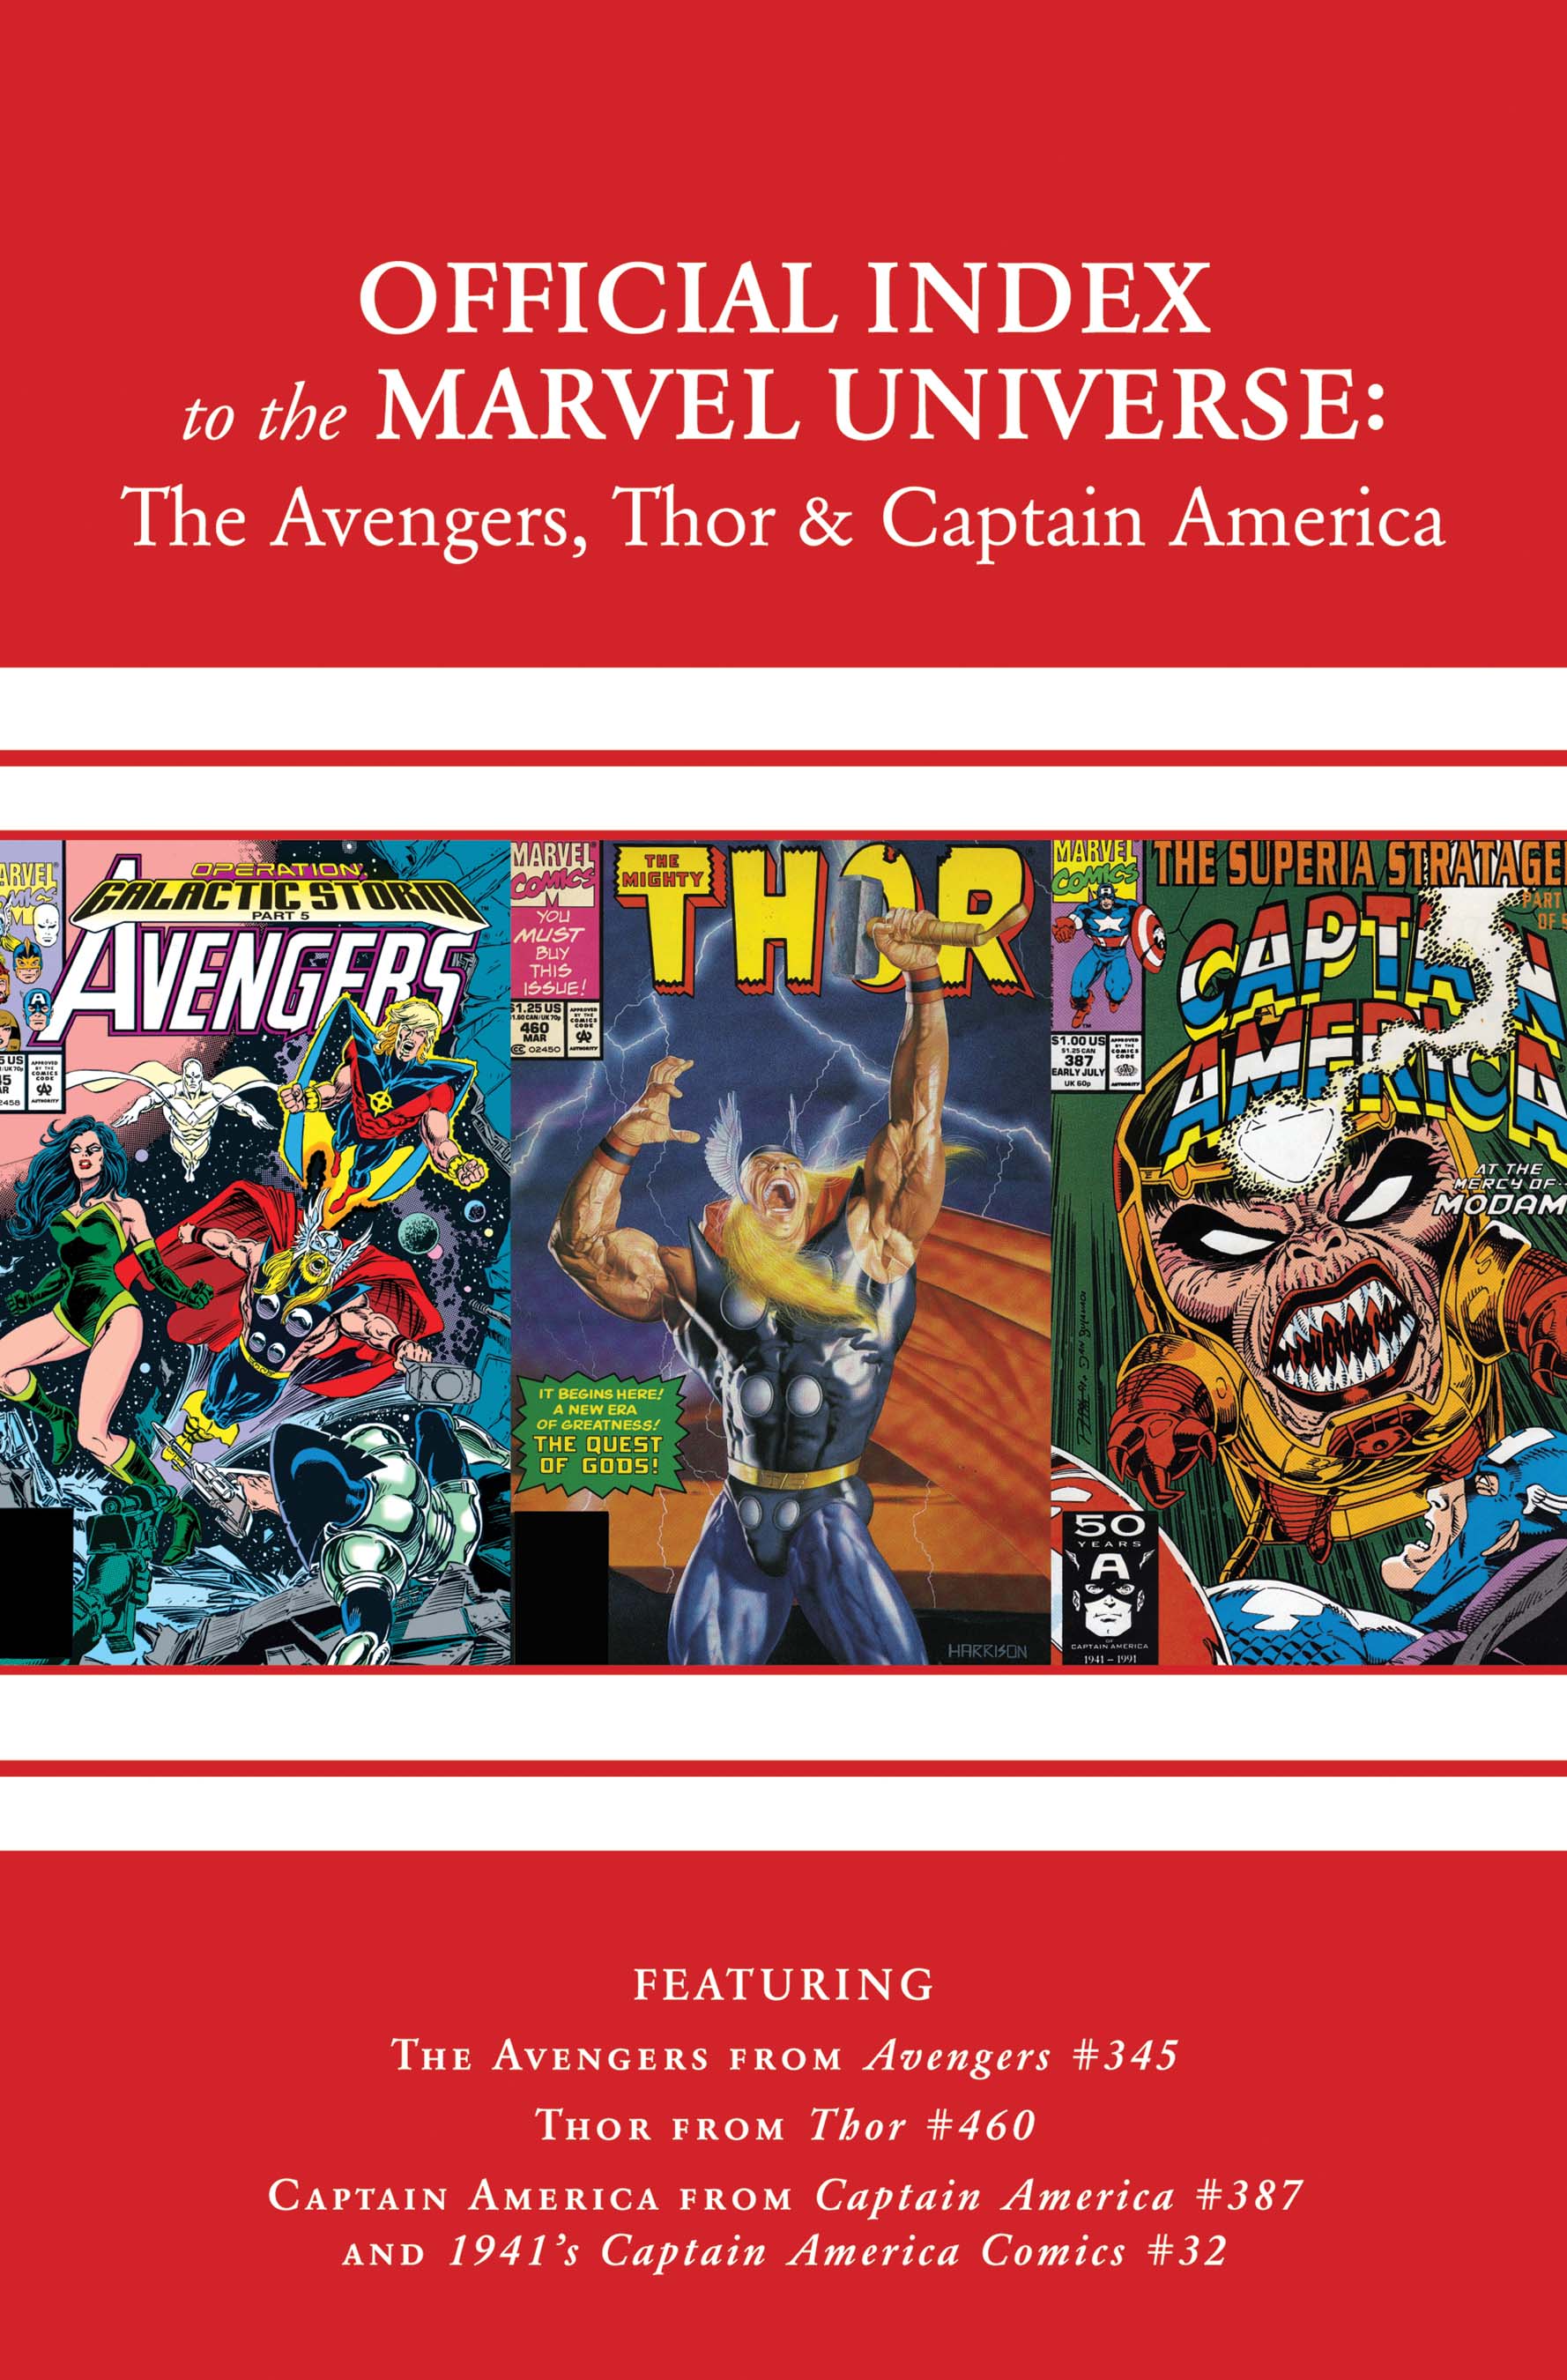 Avengers, Thor & Captain America: Official Index to the Marvel Universe (2010) #10